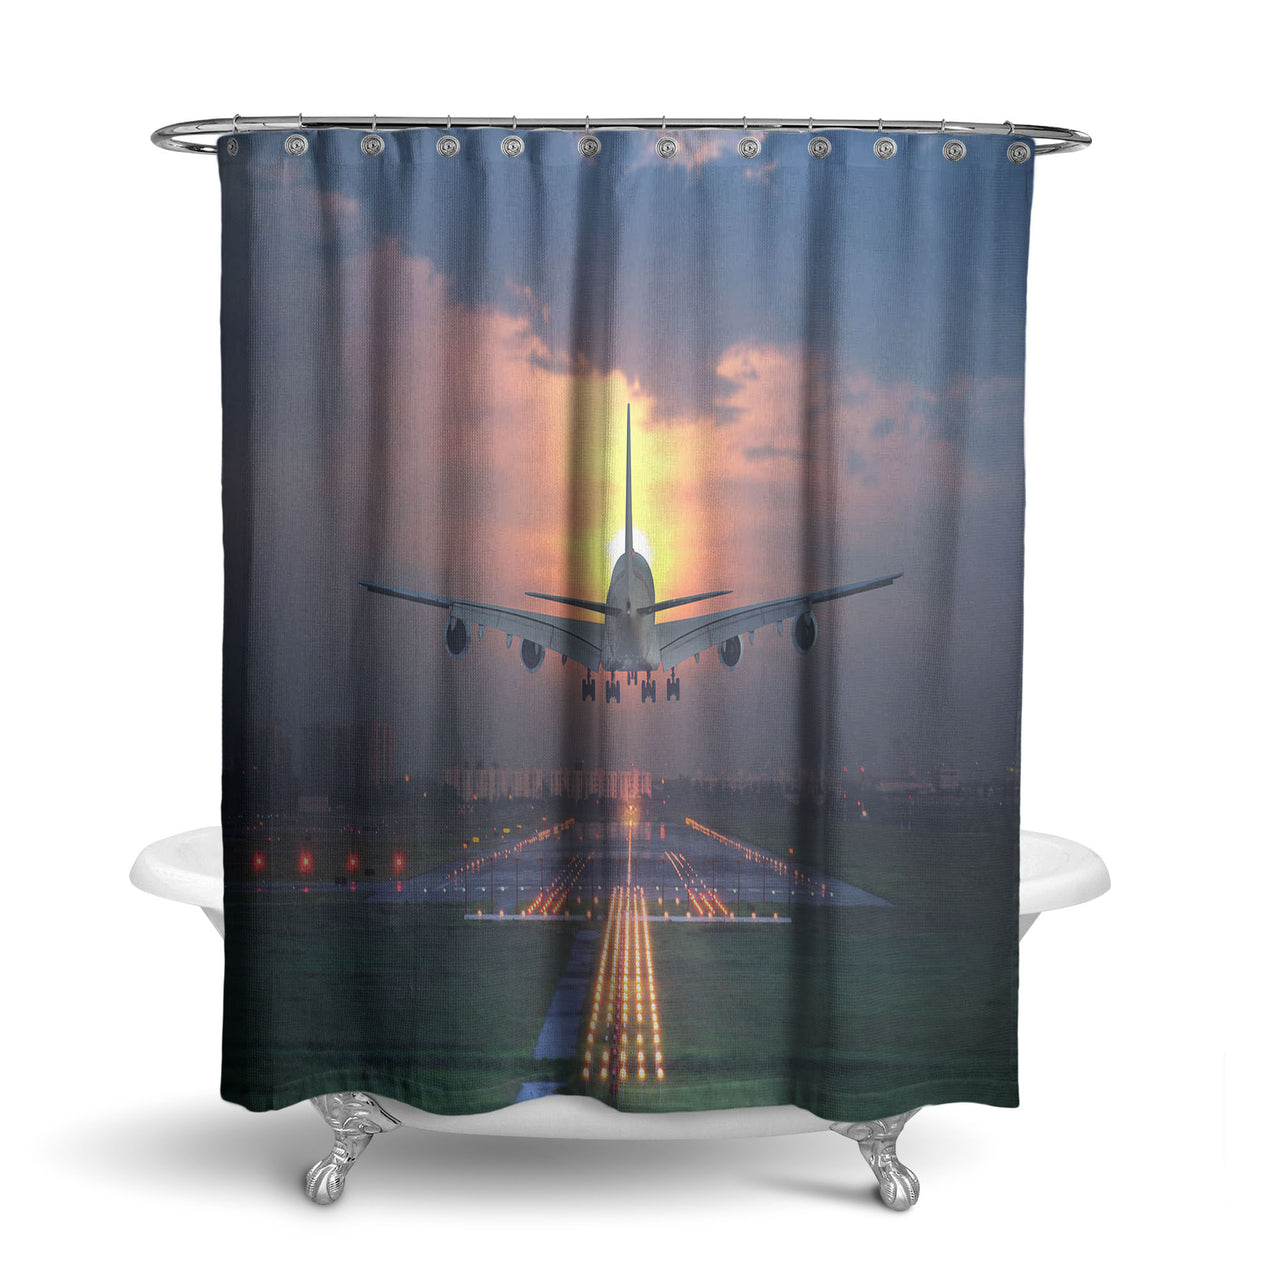 Super Airbus A380 Landing During Sunset Designed Shower Curtains